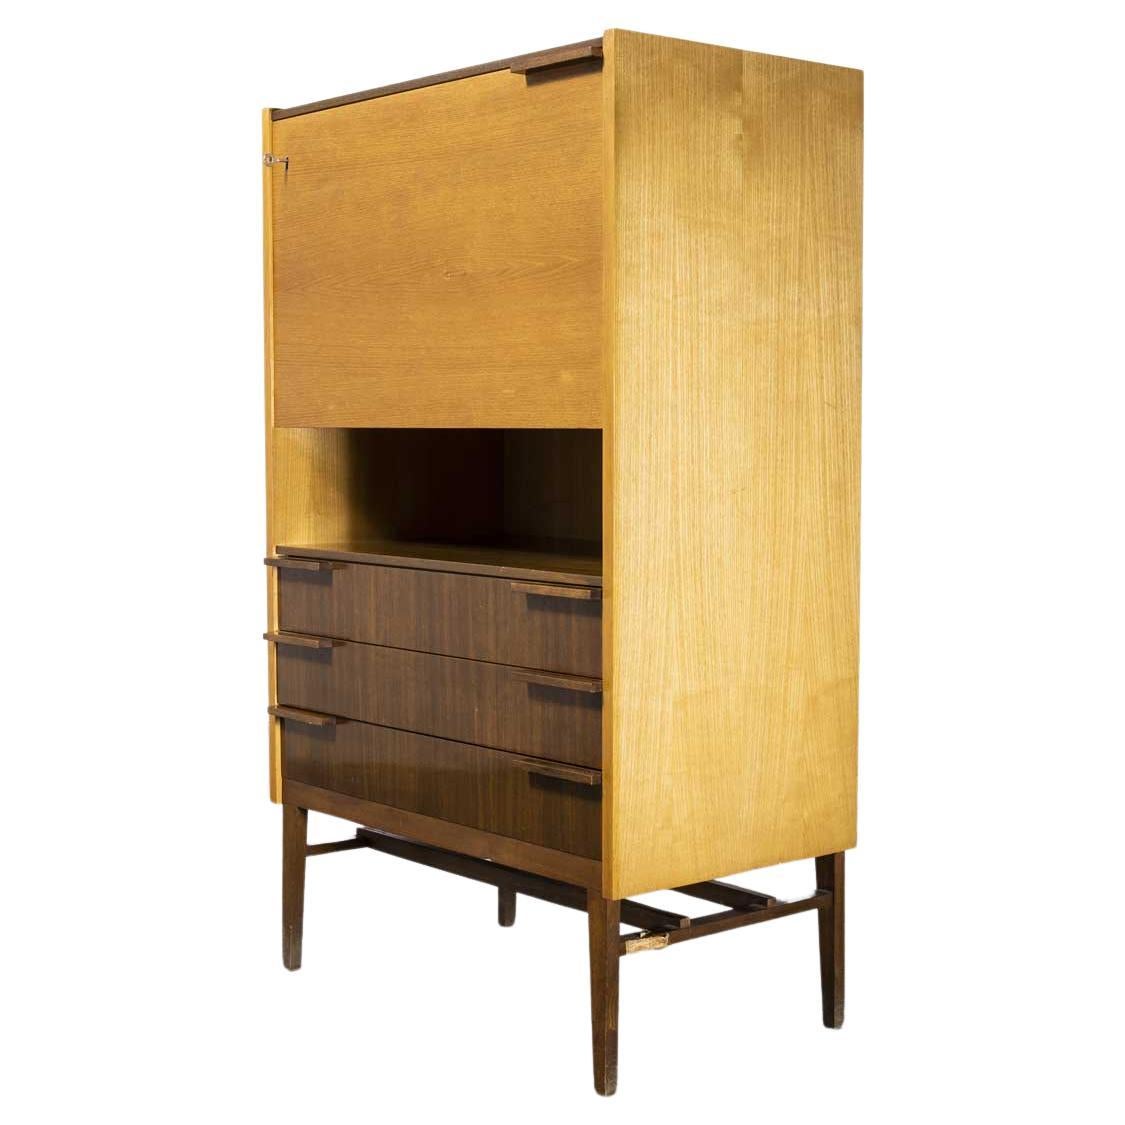 1960's Large Mid Century Desk - Cabinet - Up Zavody For Sale